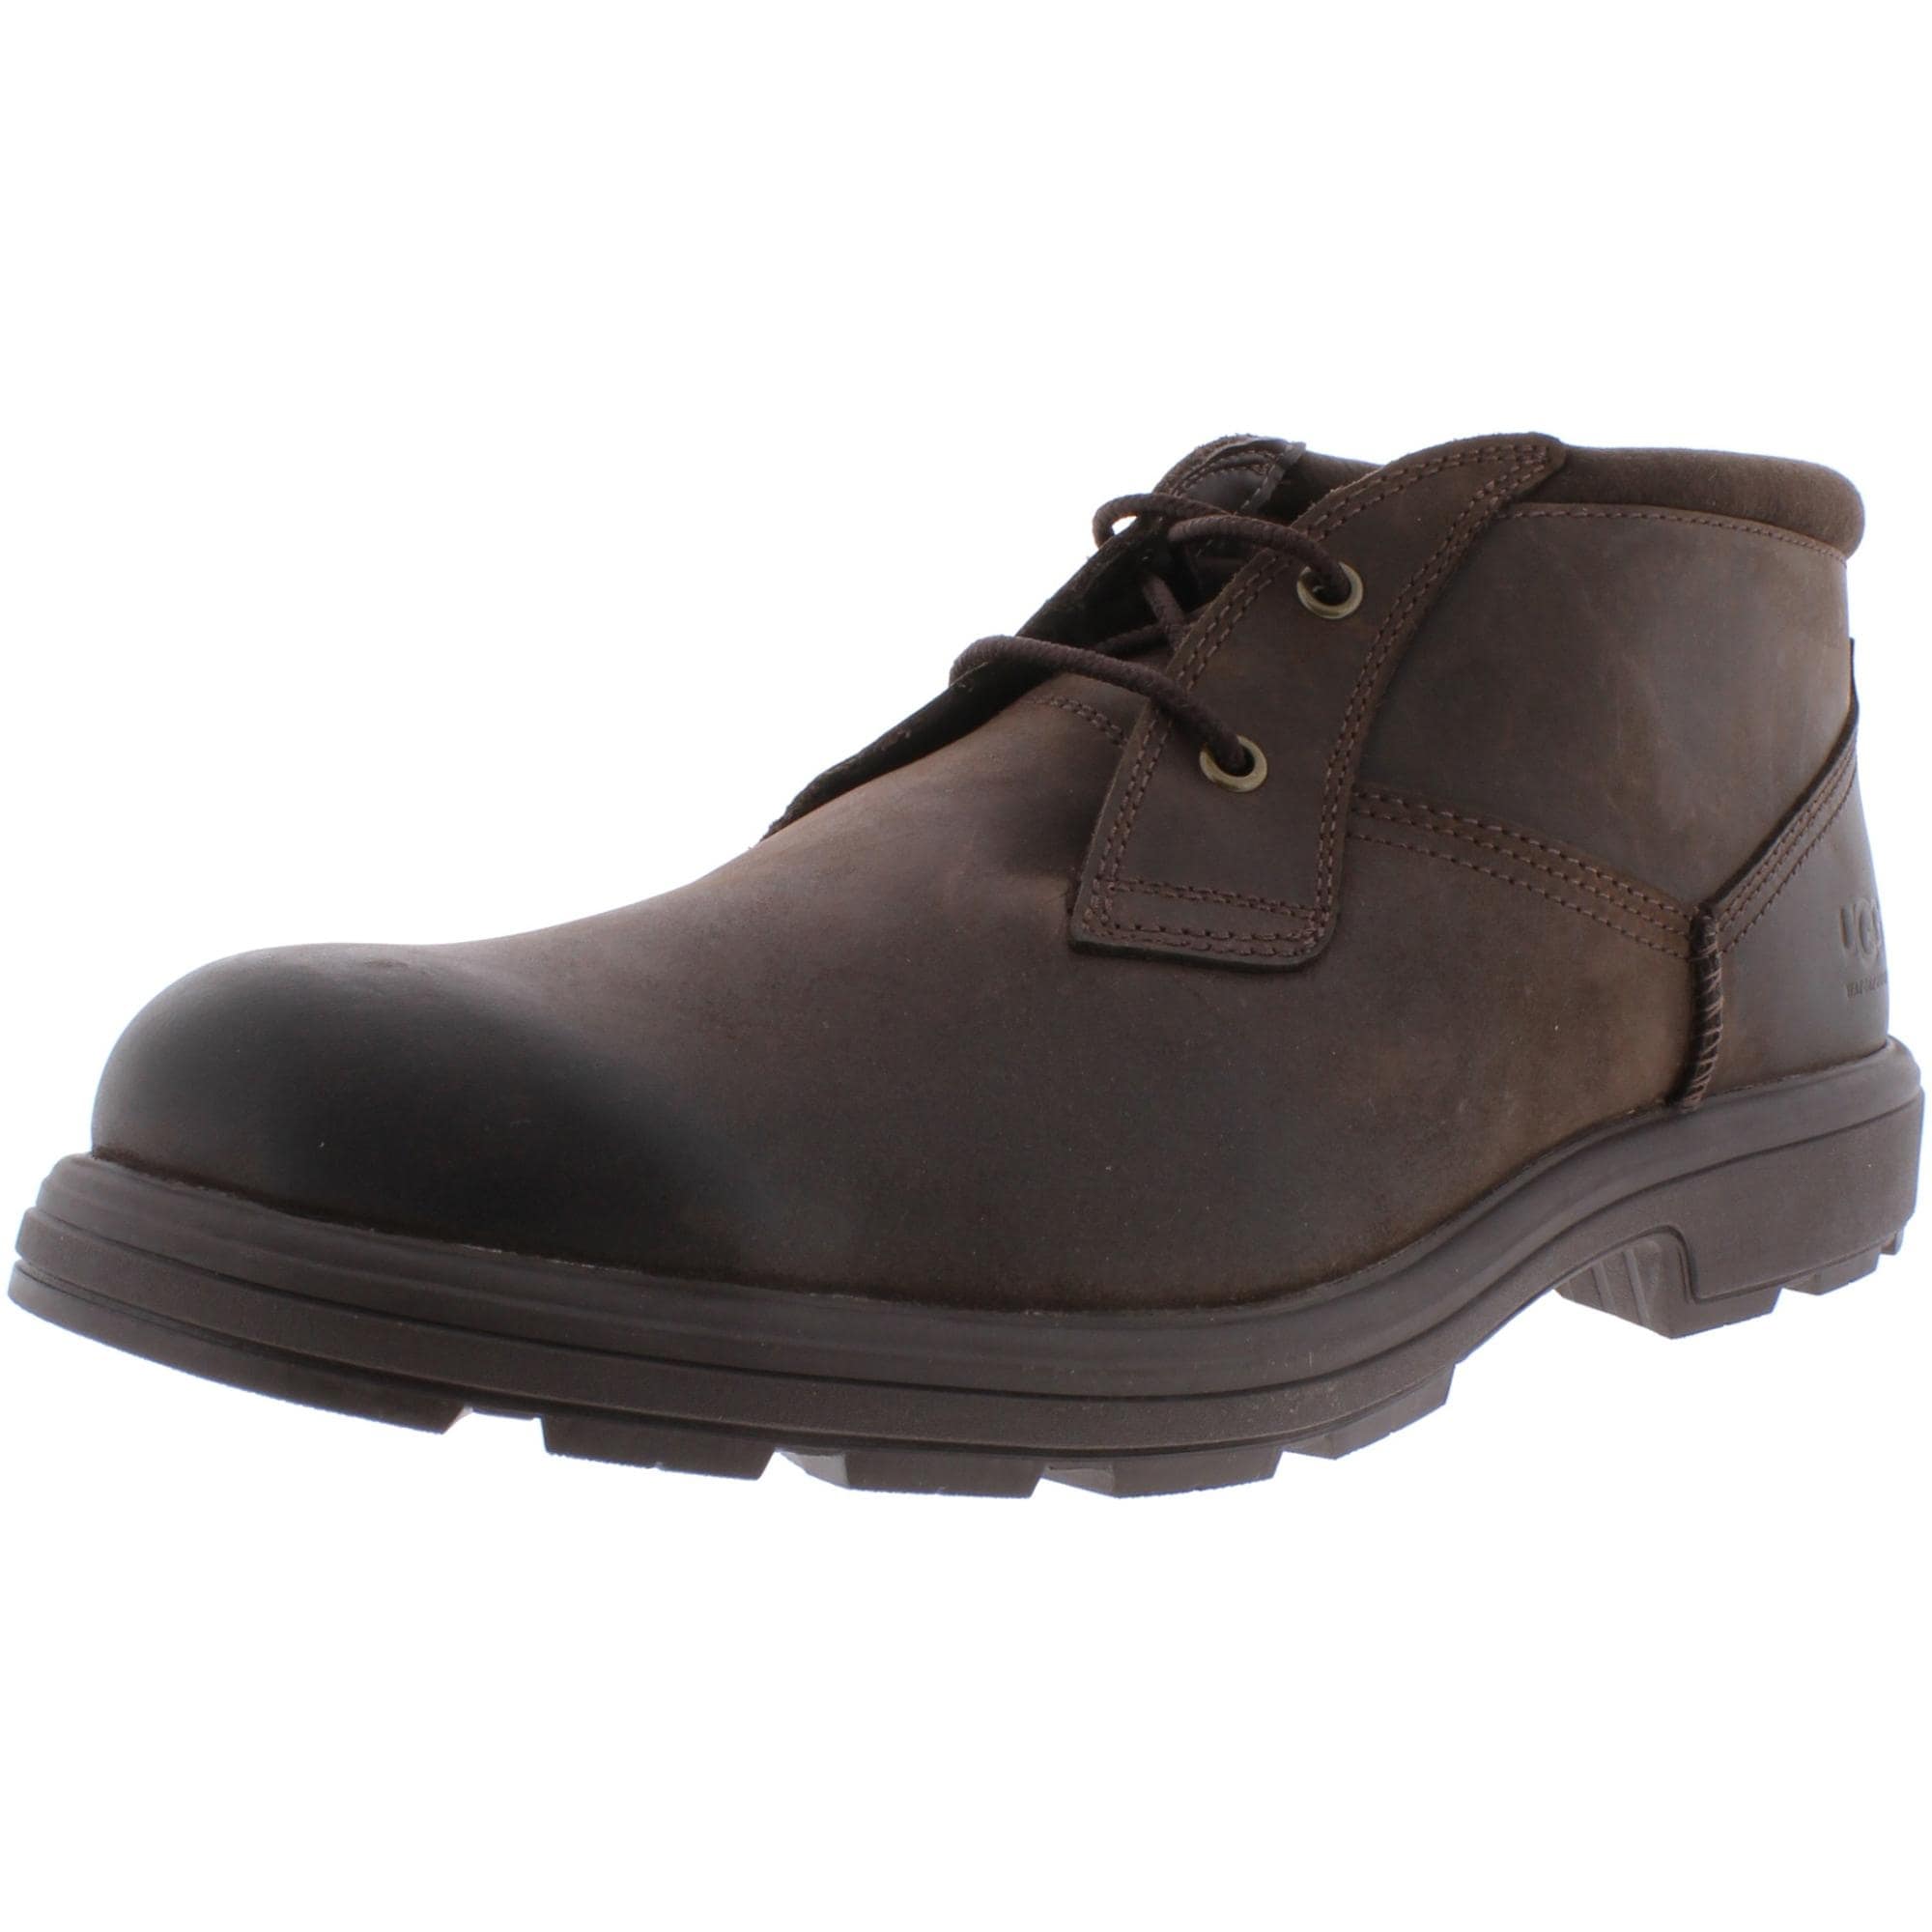 ugg type boots for men